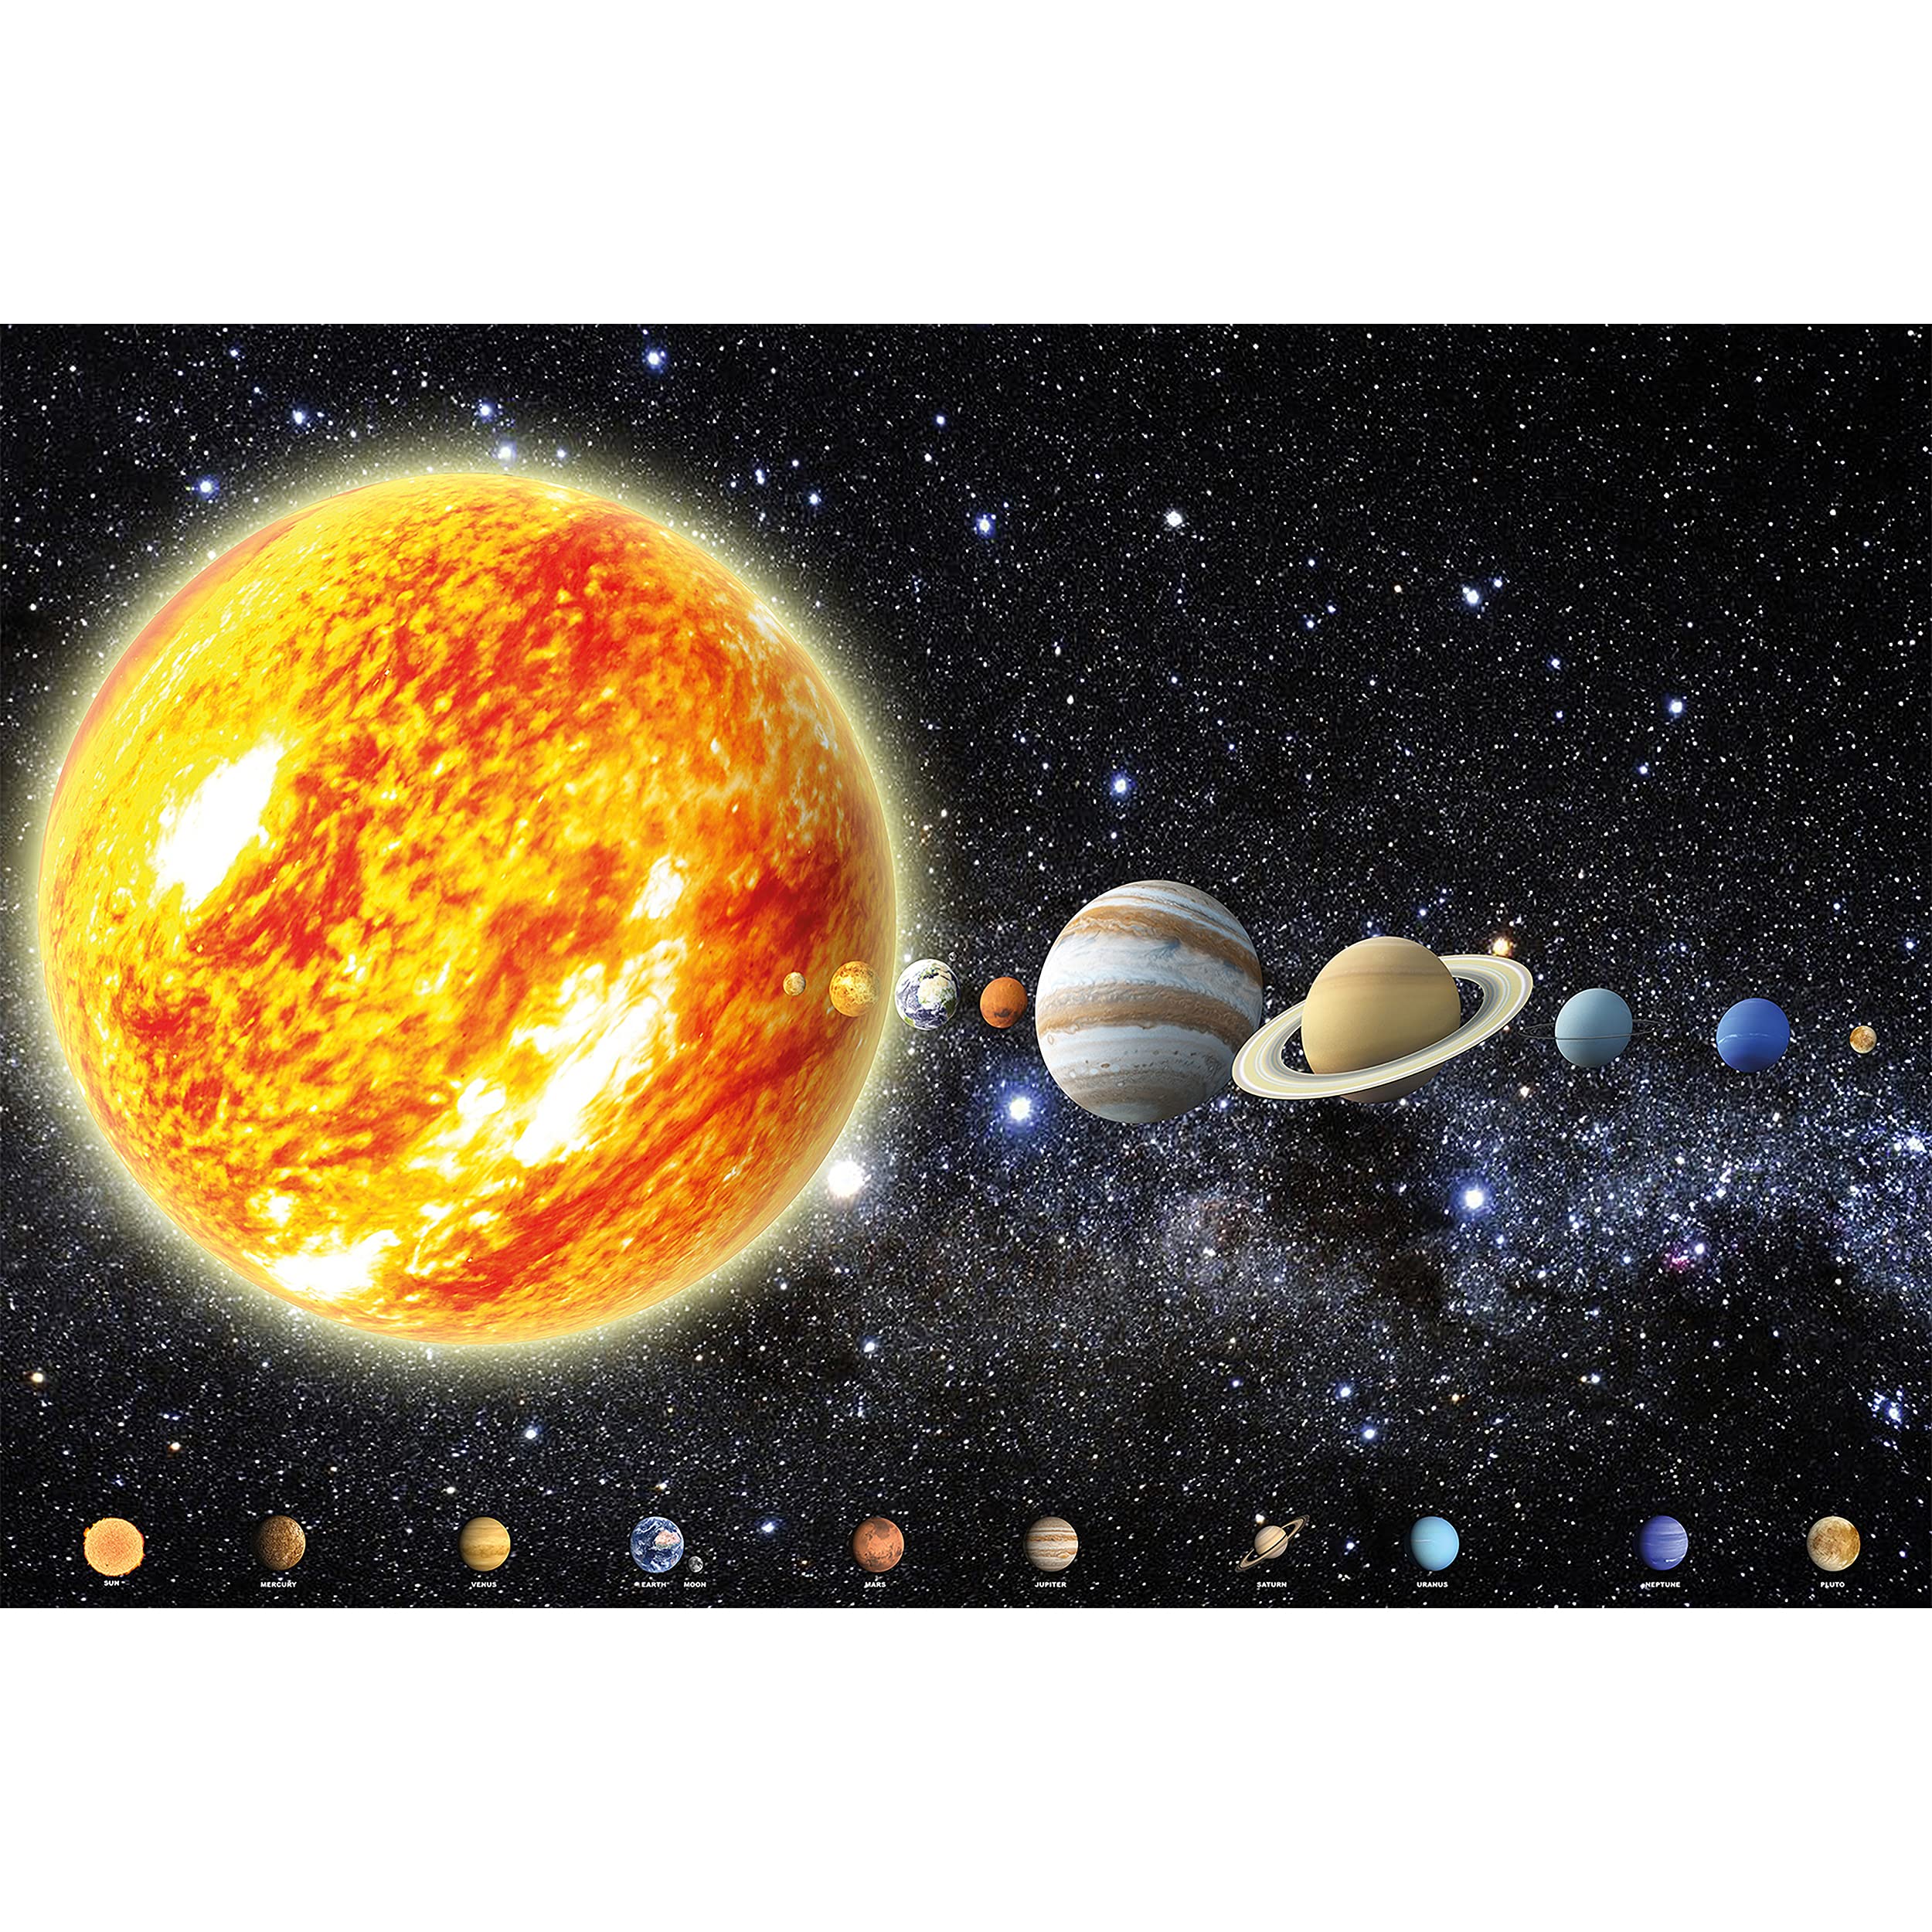 Poster – Solar System – Picture Decoration Outer Space Galaxy Cosmos Universe Planets Stars Earth Sun Moon Orbit Educational Image Photo Decor Wall...